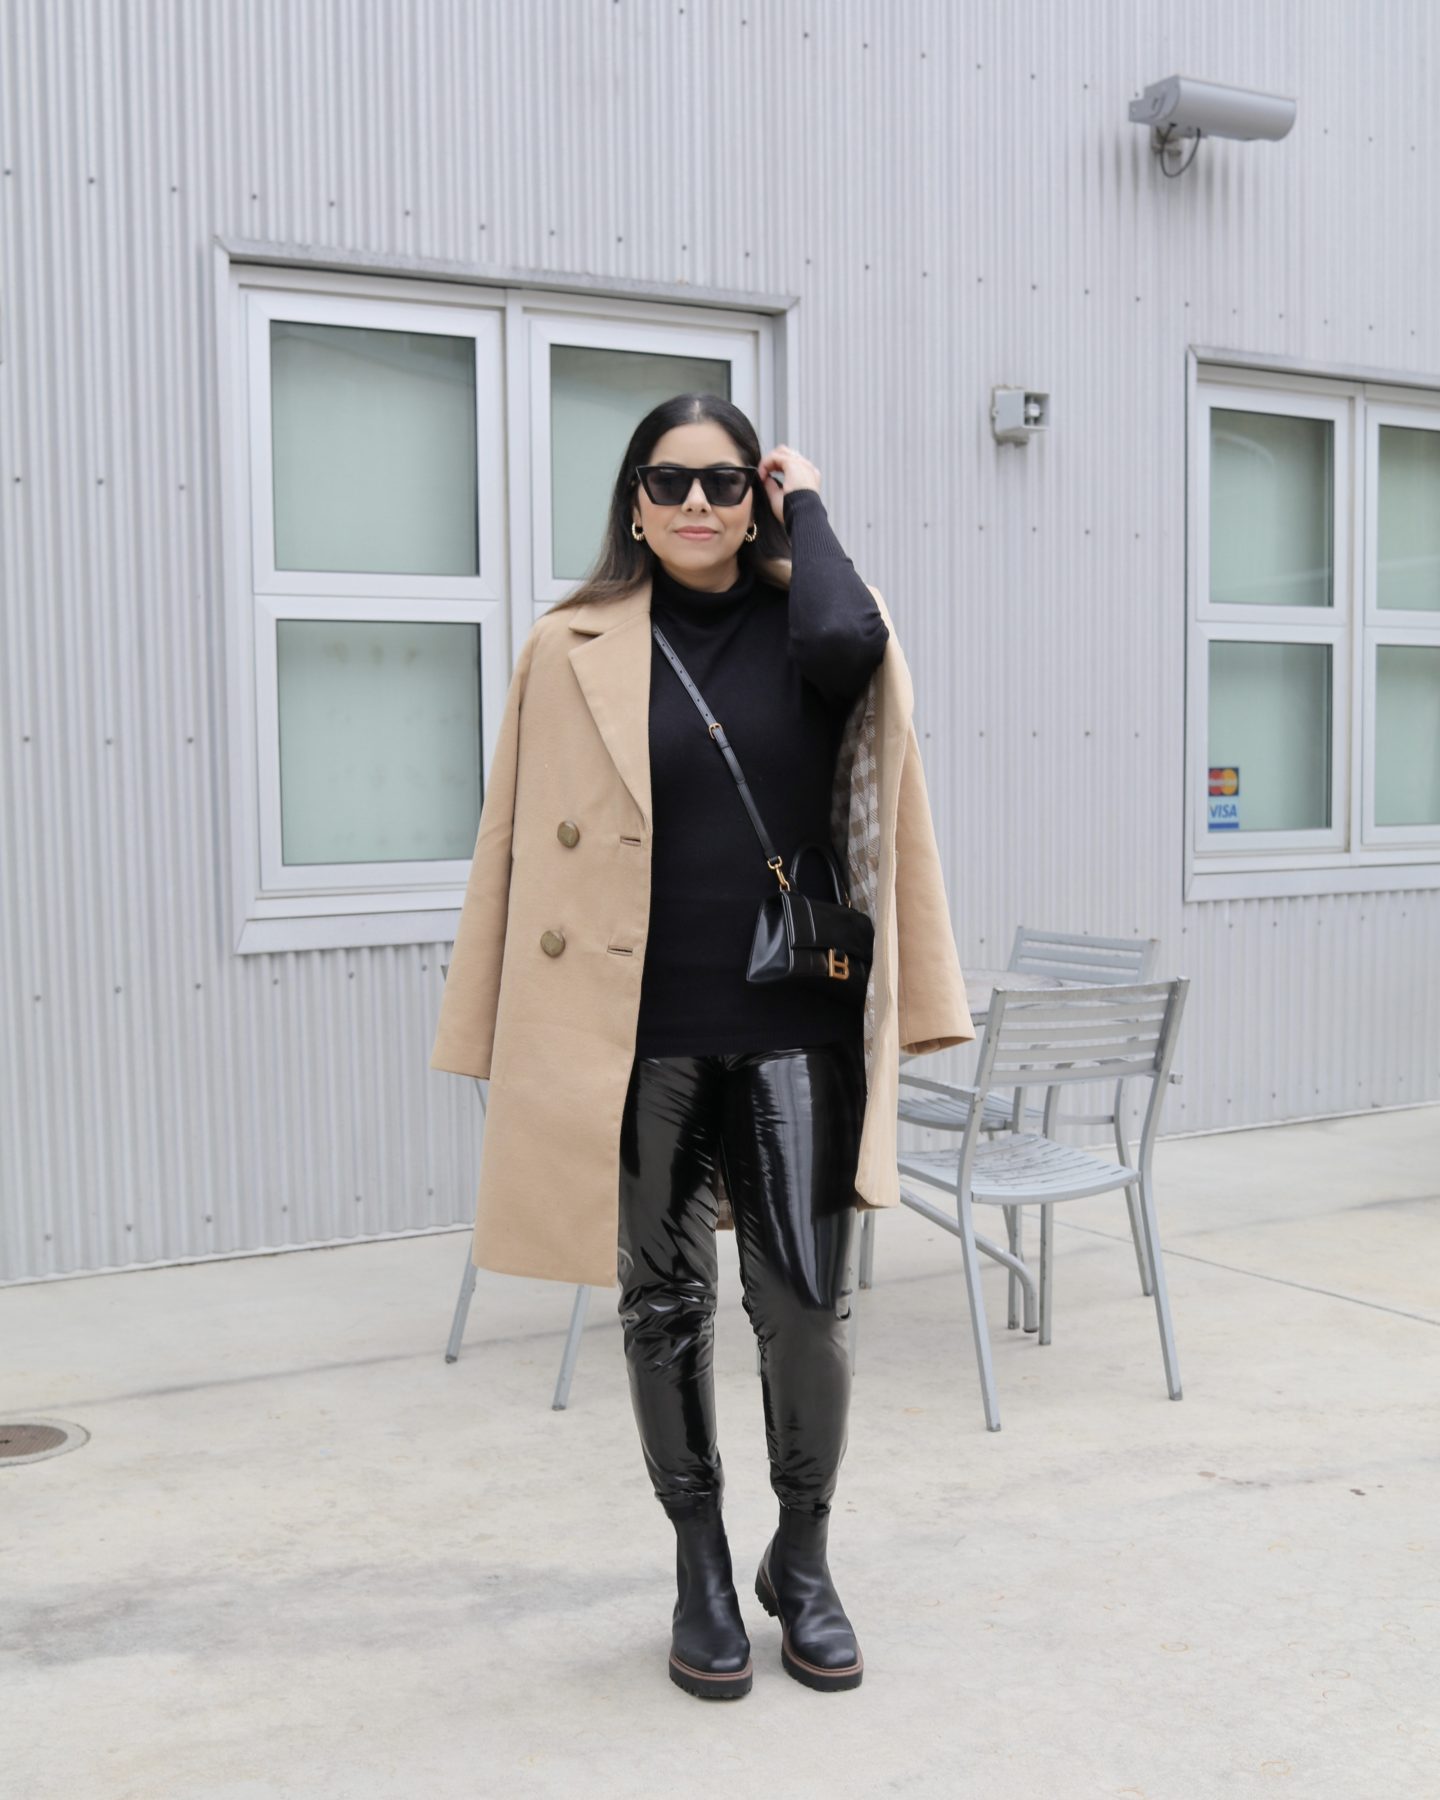 HOW TO STYLE PATENT LEATHER LEGGINGS!